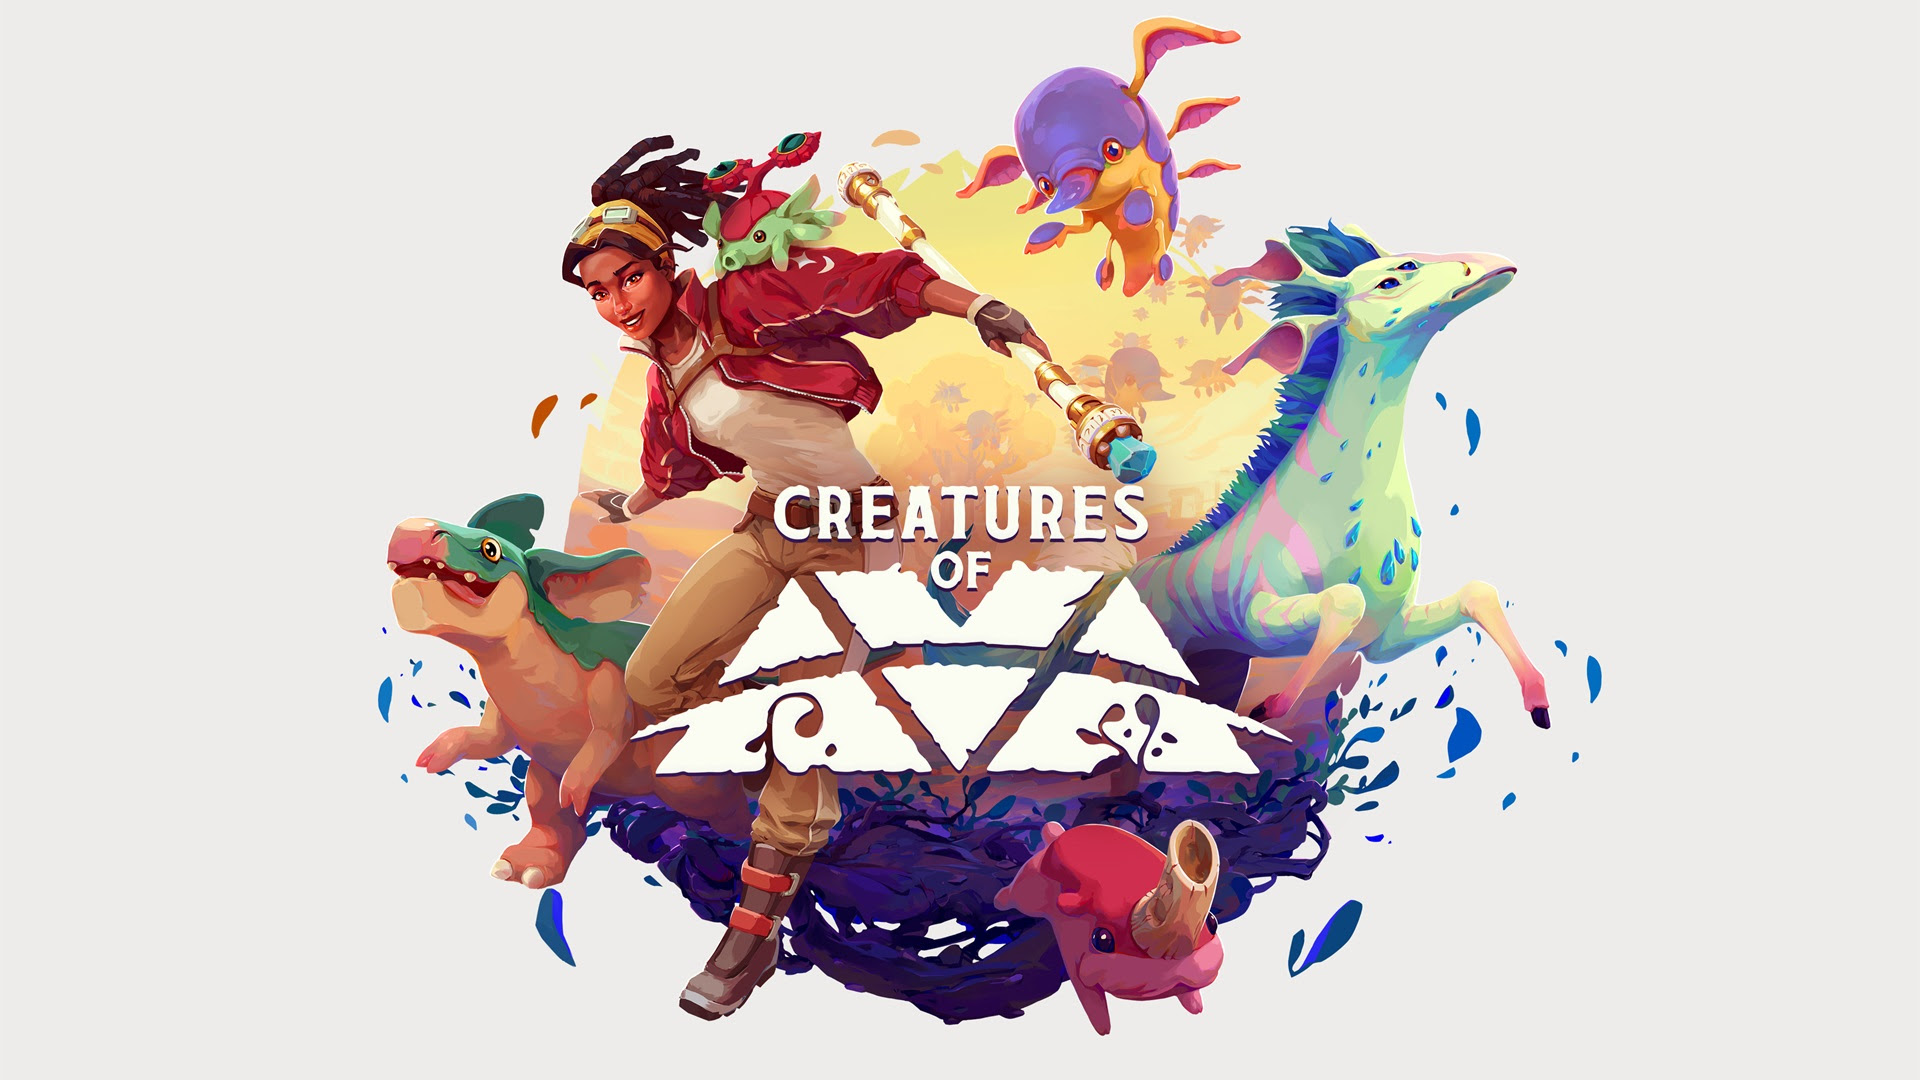 Creatures of Ava is a creature-saving game with music and belly rubs